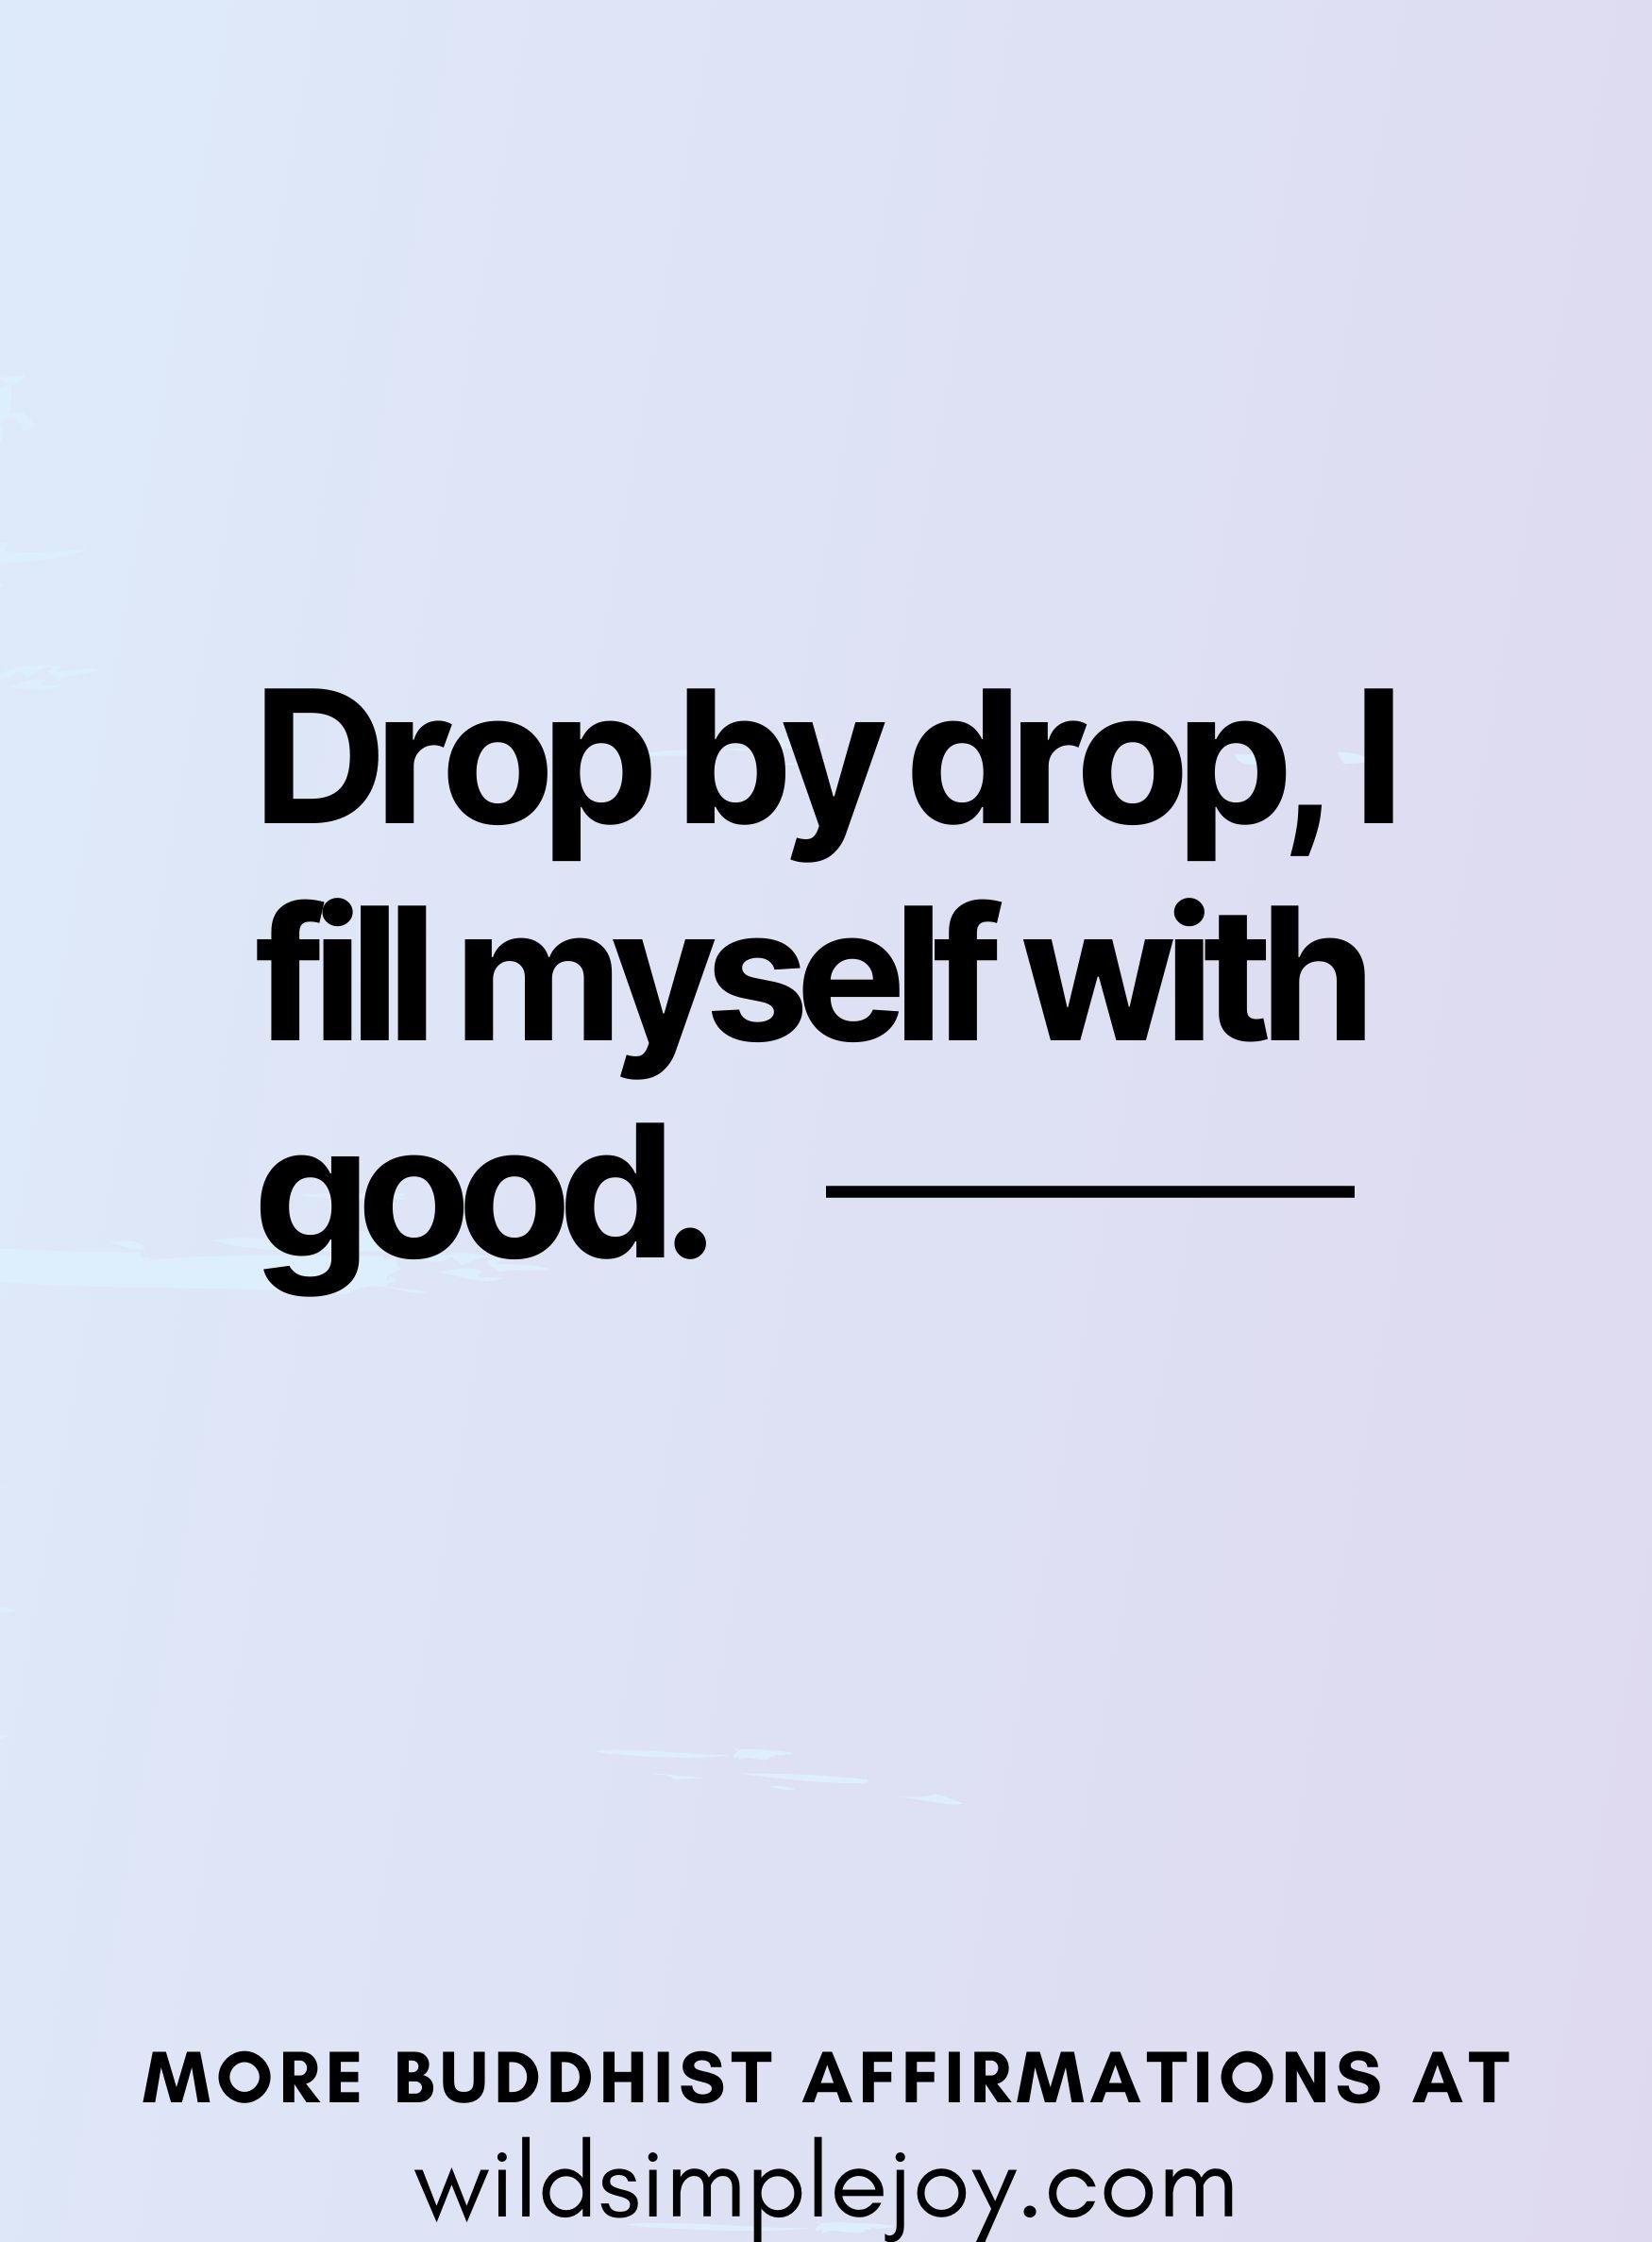 Drop by drop I fill myself with good. (Affirmation based on Buddha quote on a blue and purple background)